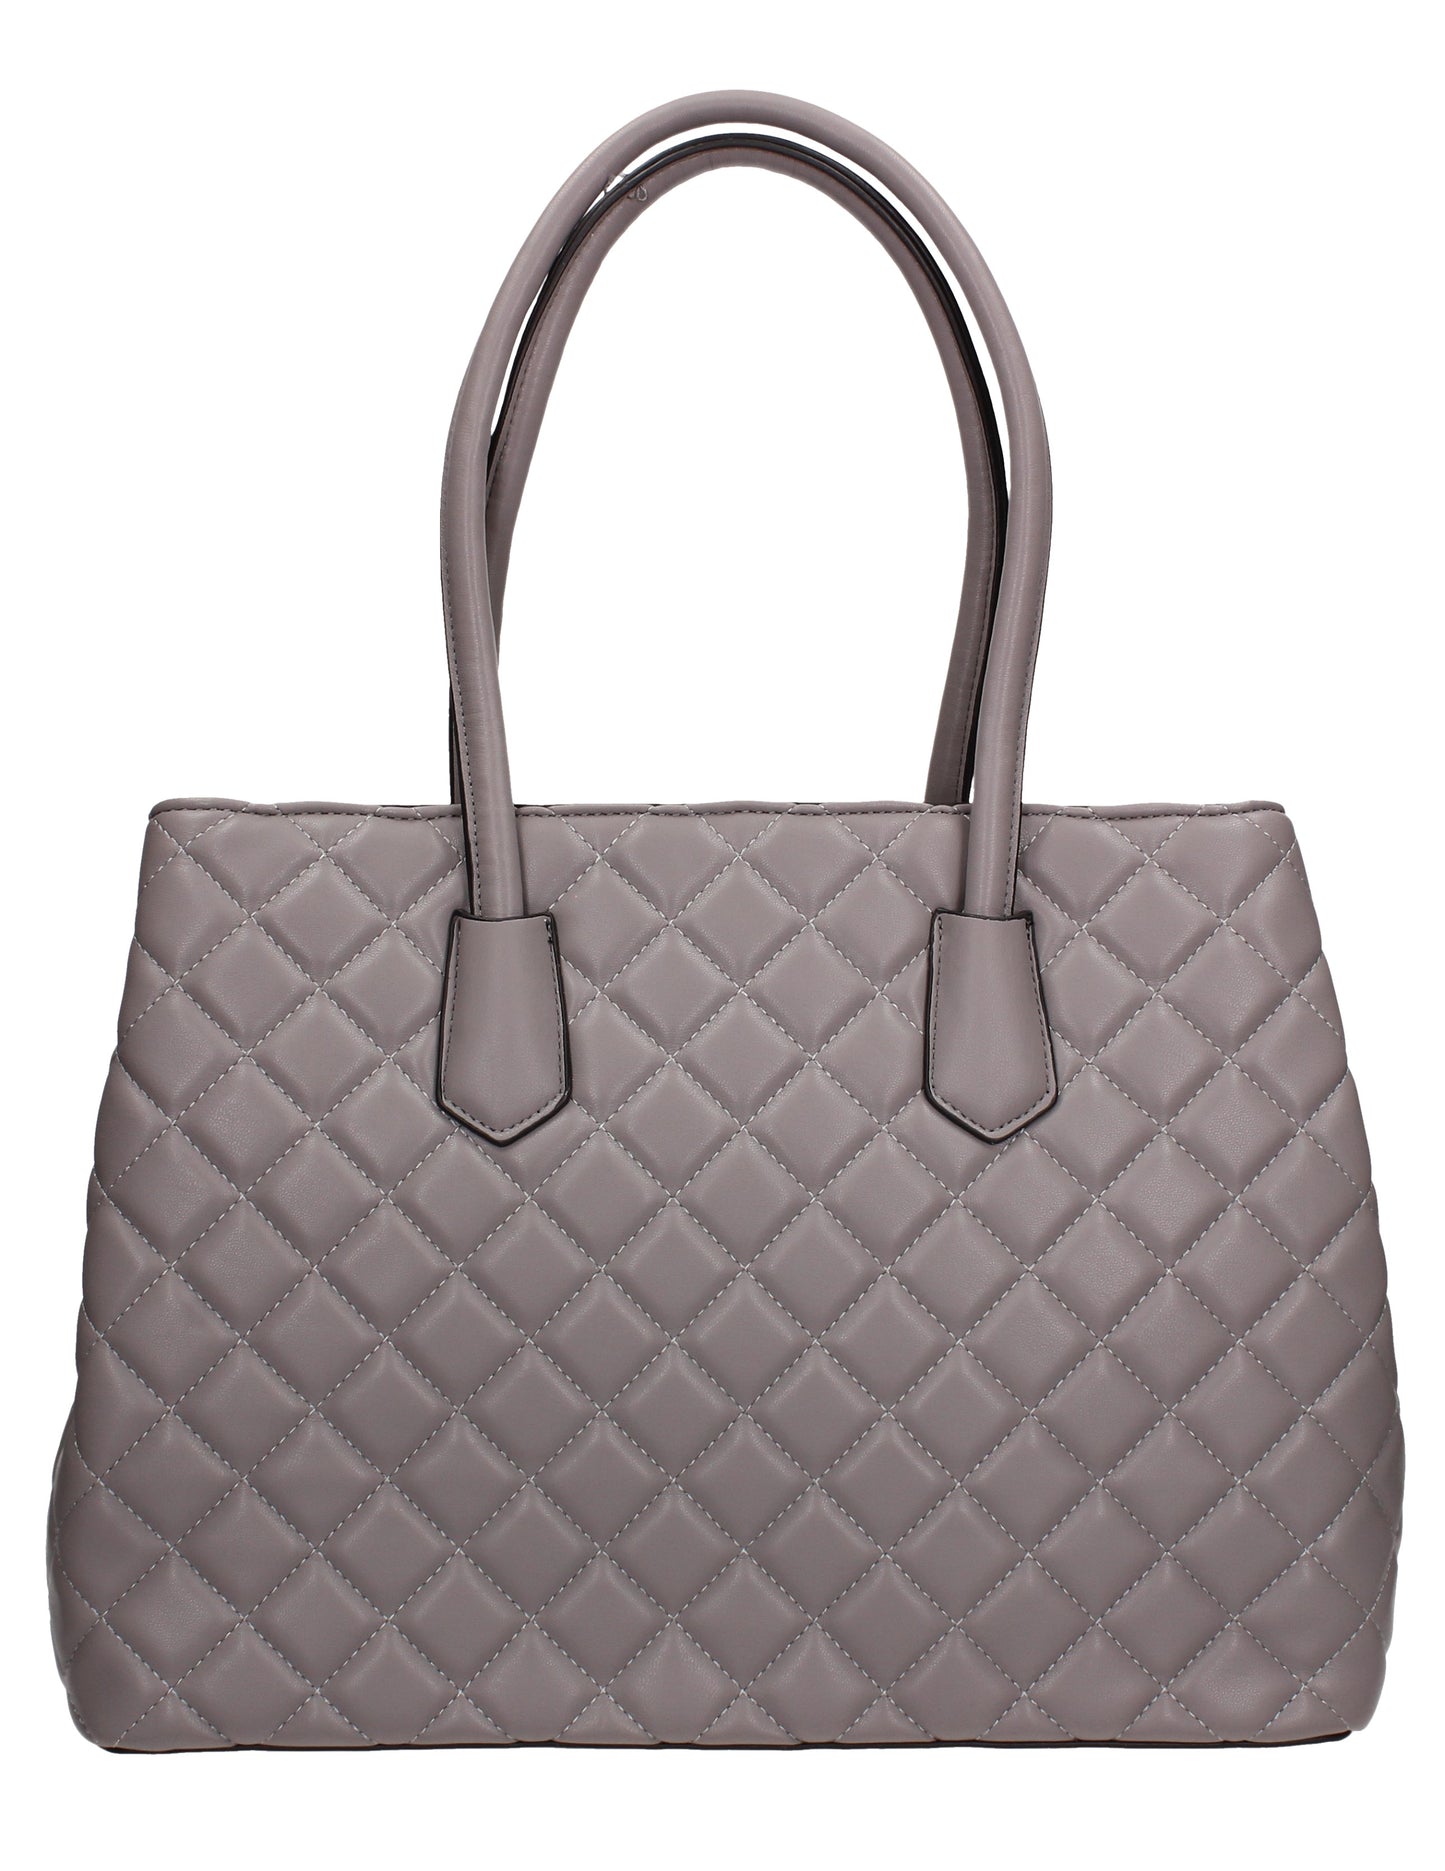 Buy your Valeria Handbag Grey Today! Buy with confidence from Swankyswans